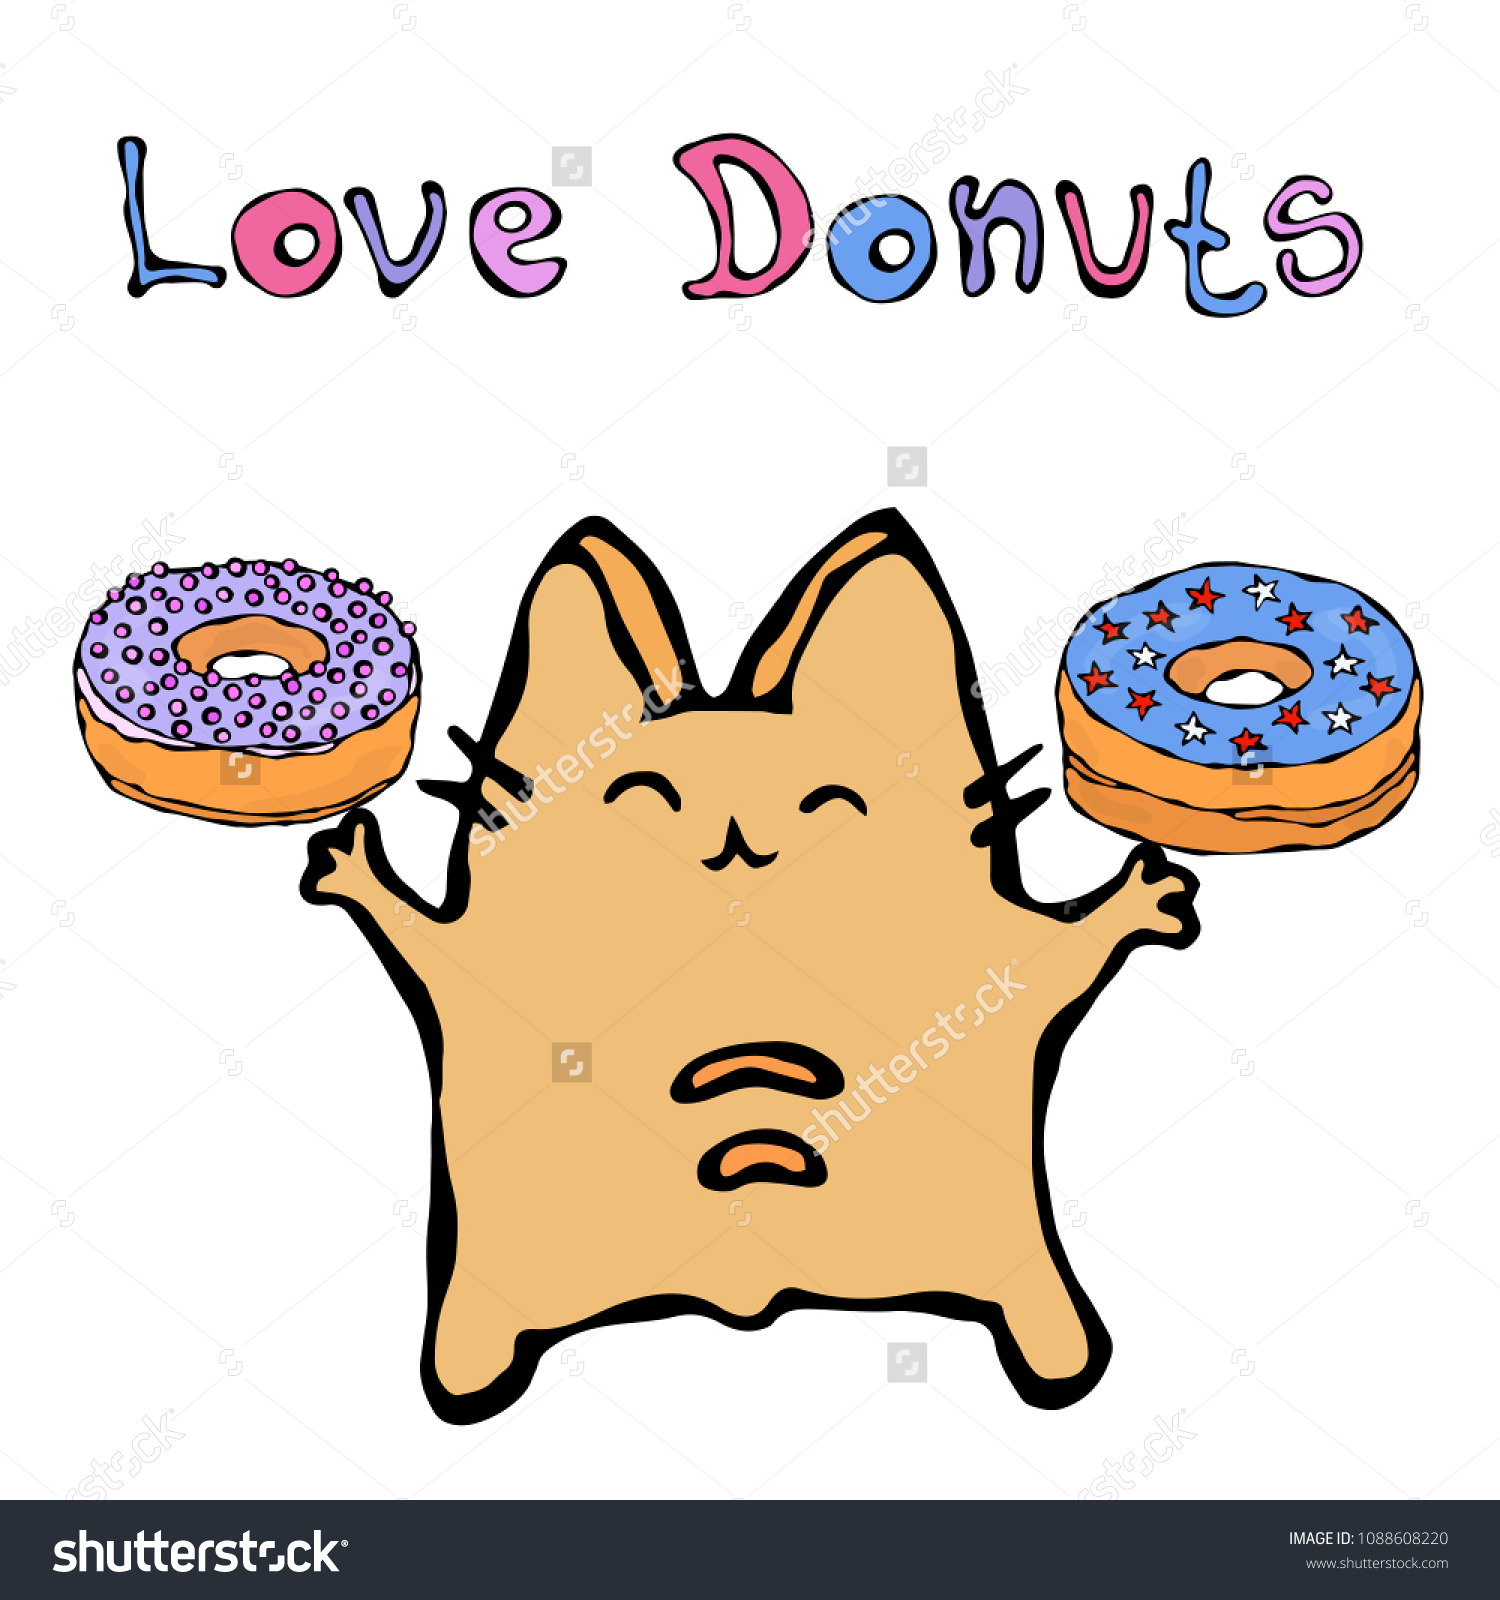 Savoyar The Cat Holding Donuts Love Donut Cute Royalty Free Stock Vector 1088608220 2618